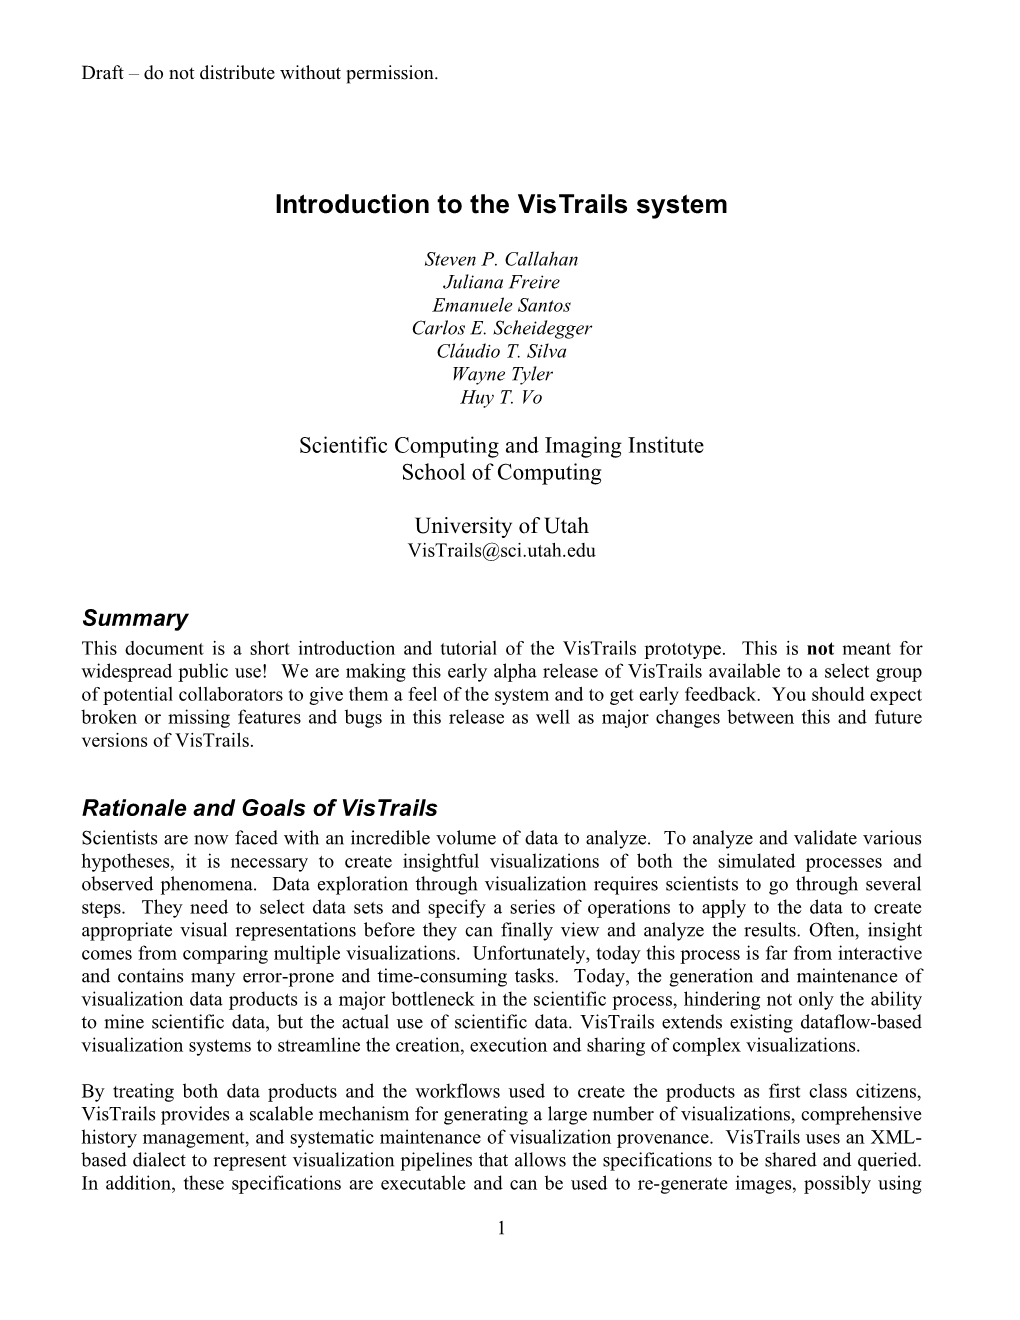 Introduction to the Vistrails System